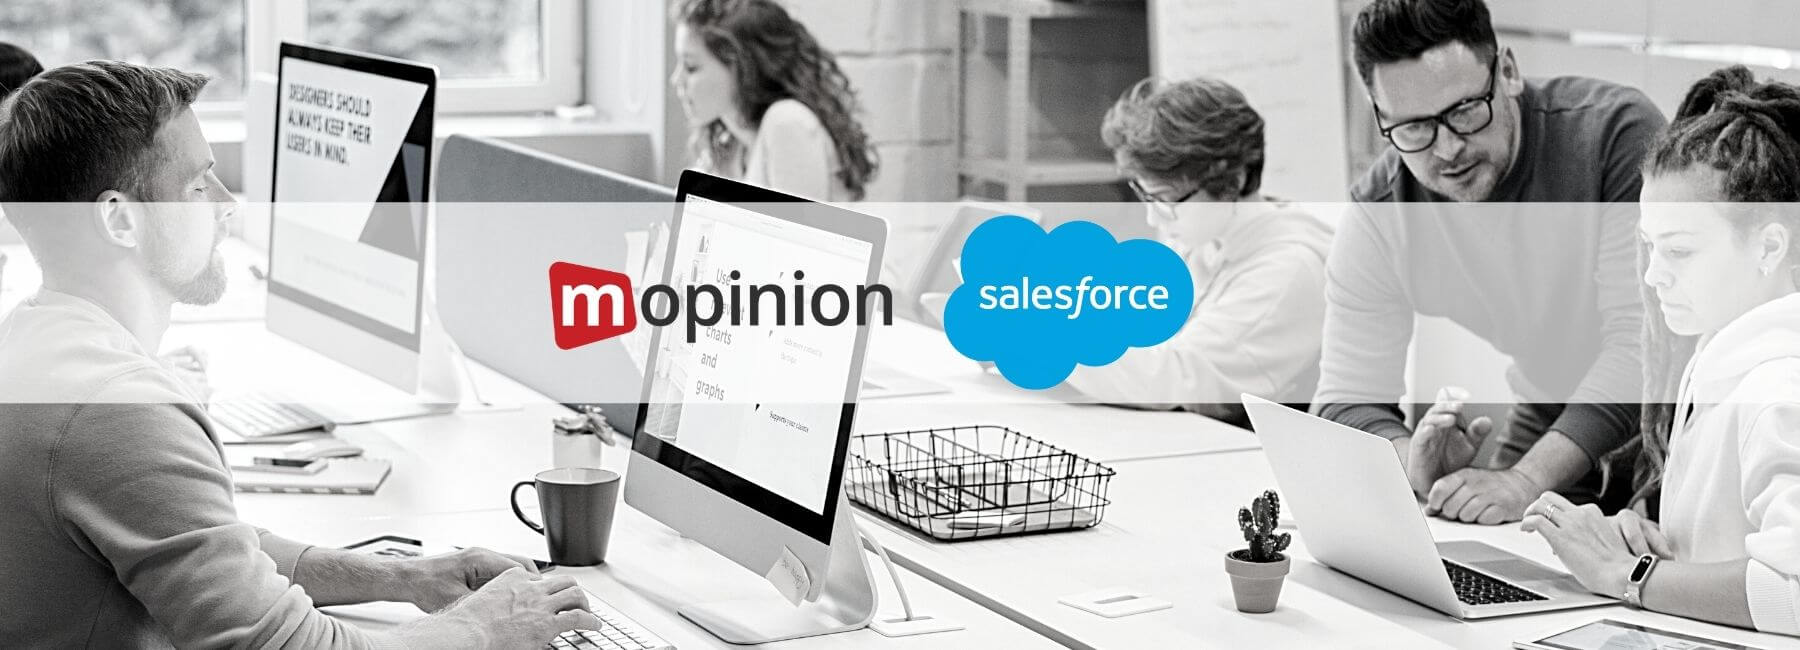 Mopinion launches new integration with Salesforce